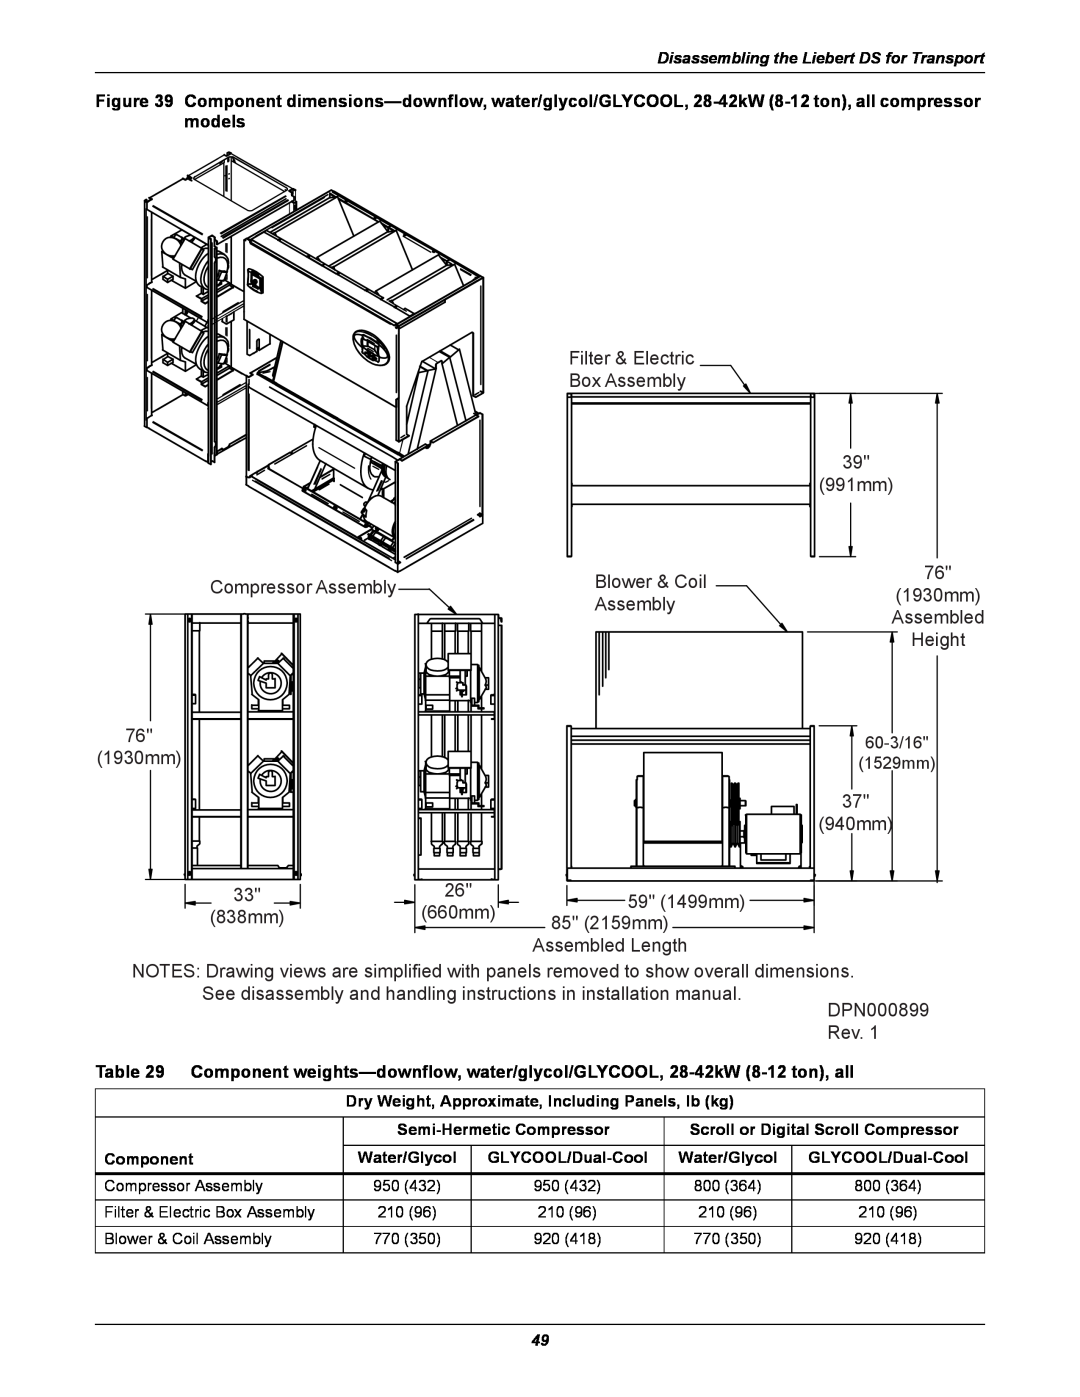 Liebert DS user manual Component dimensions-downflow, water/glycol/GLYCOOL, 28-42kW 8-12 ton, all compressor models 